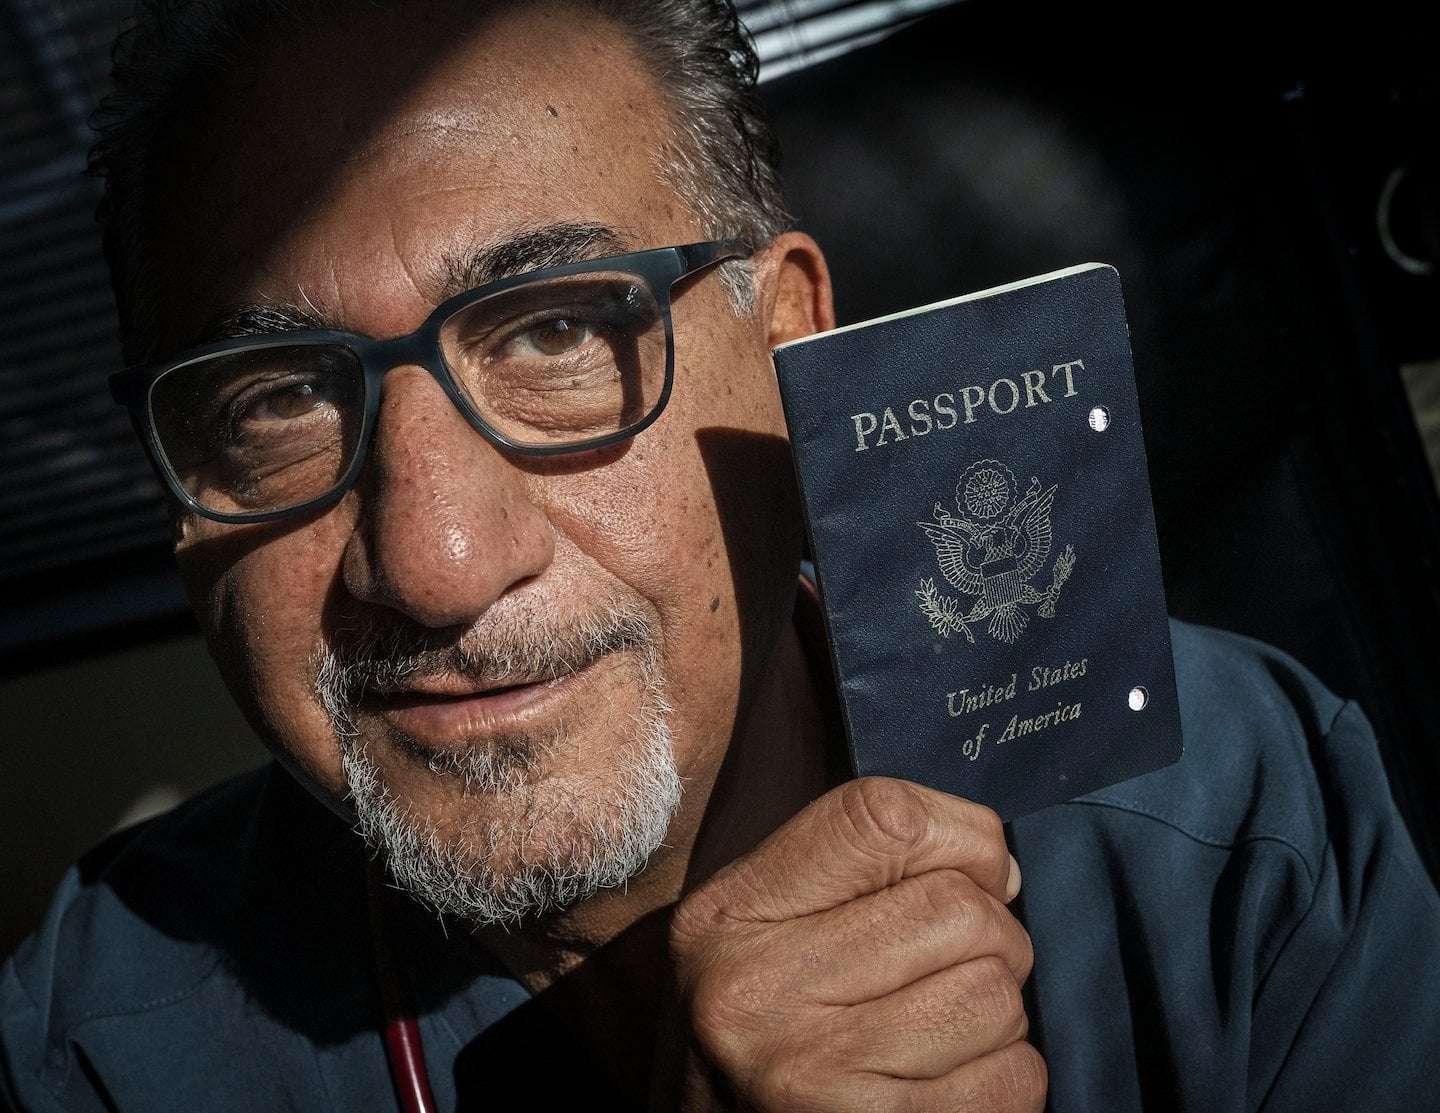 image for A doctor tried to renew his passport. Now he’s no longer a citizen.